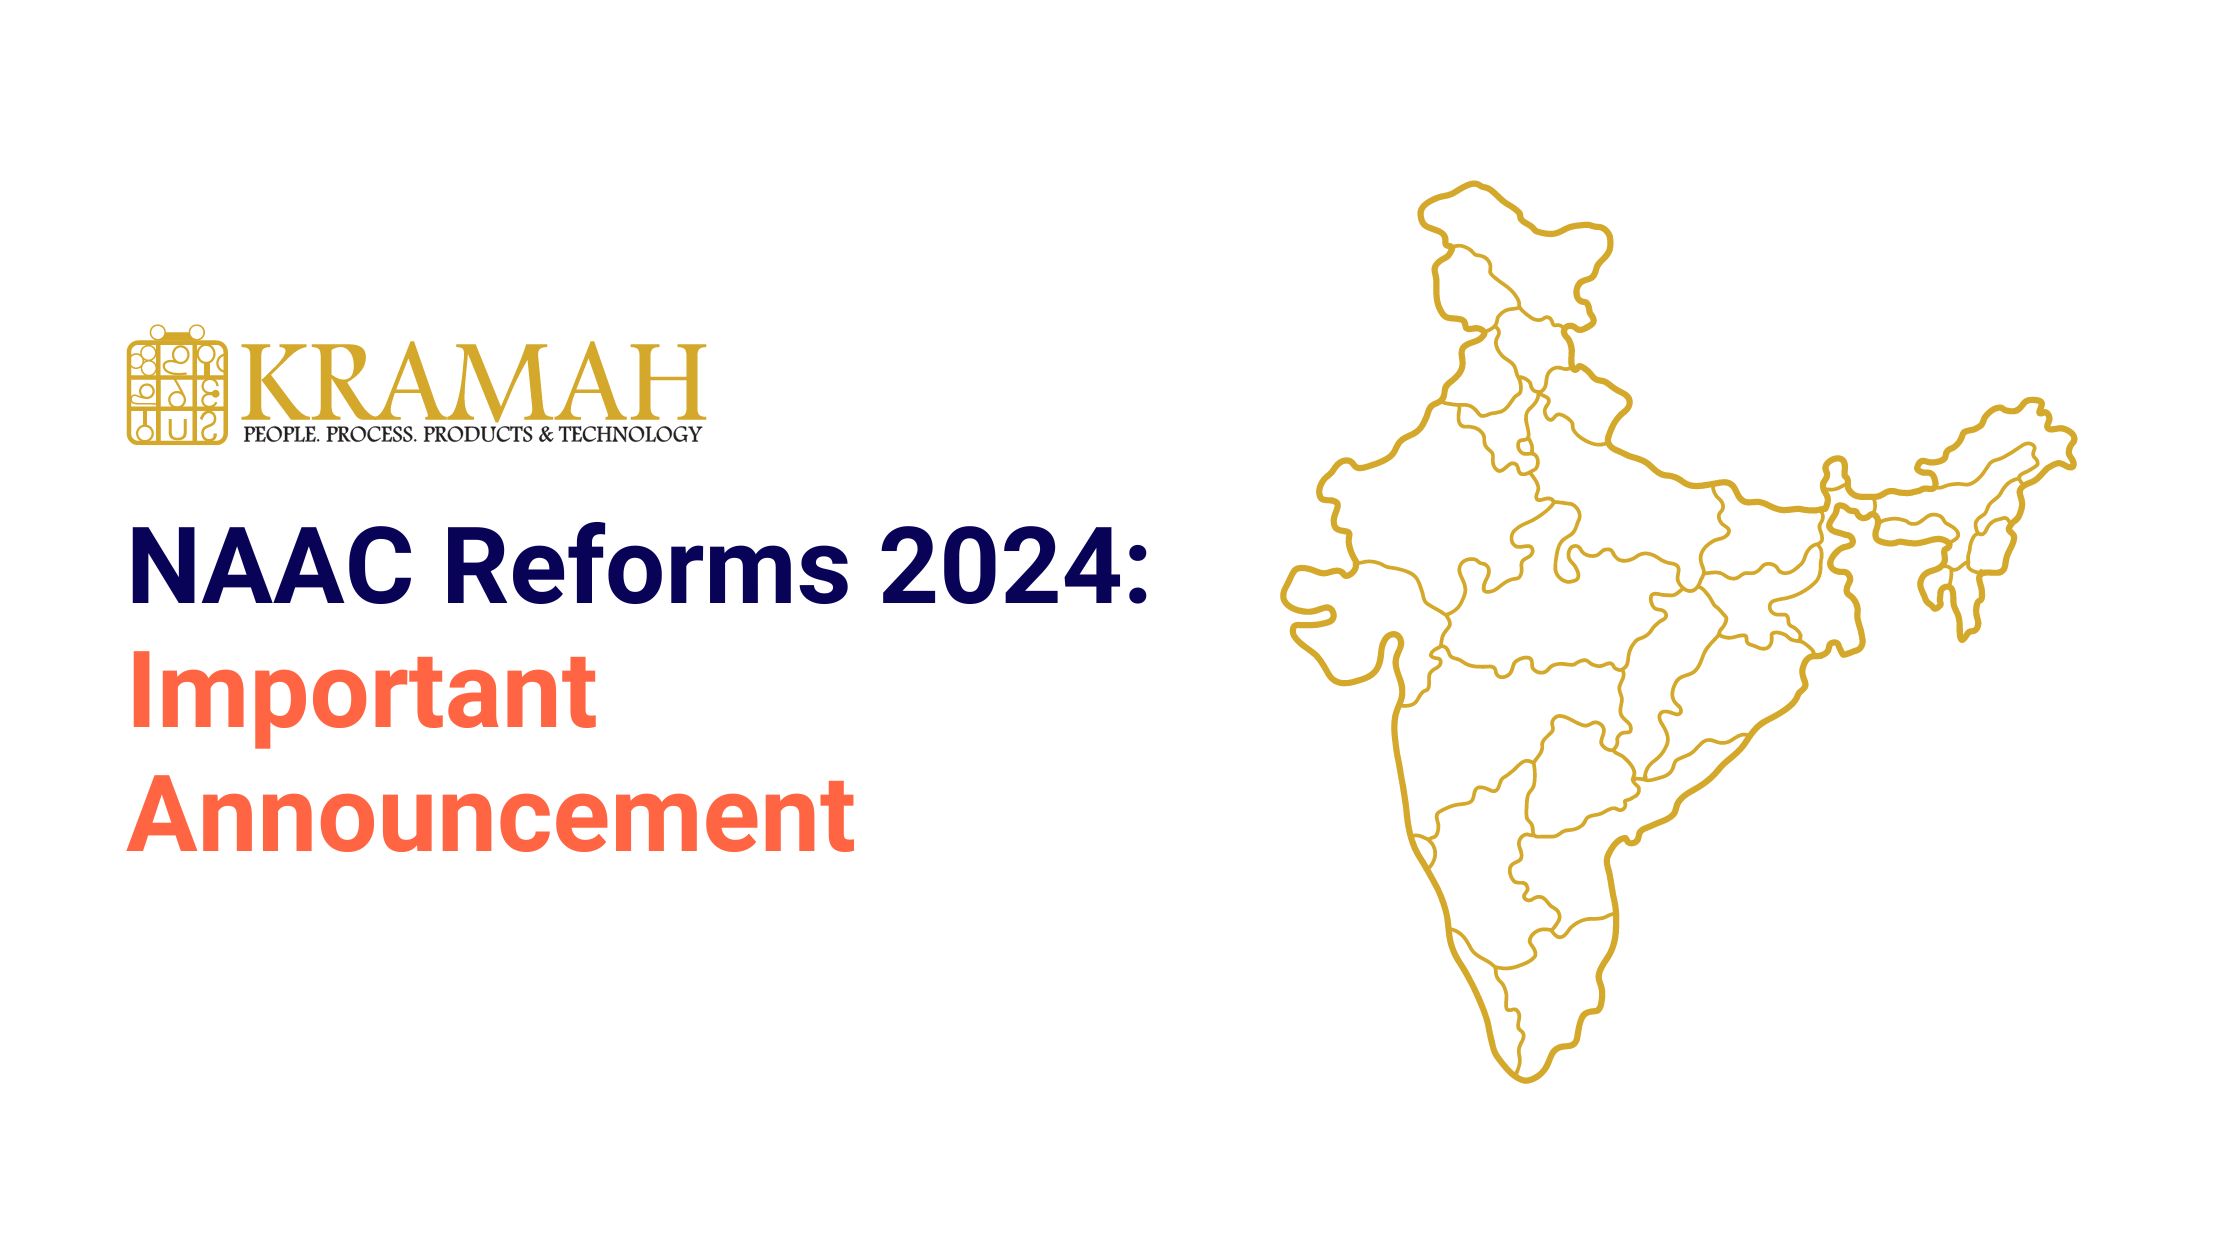 NAAC Reforms 2024 Important Announcement